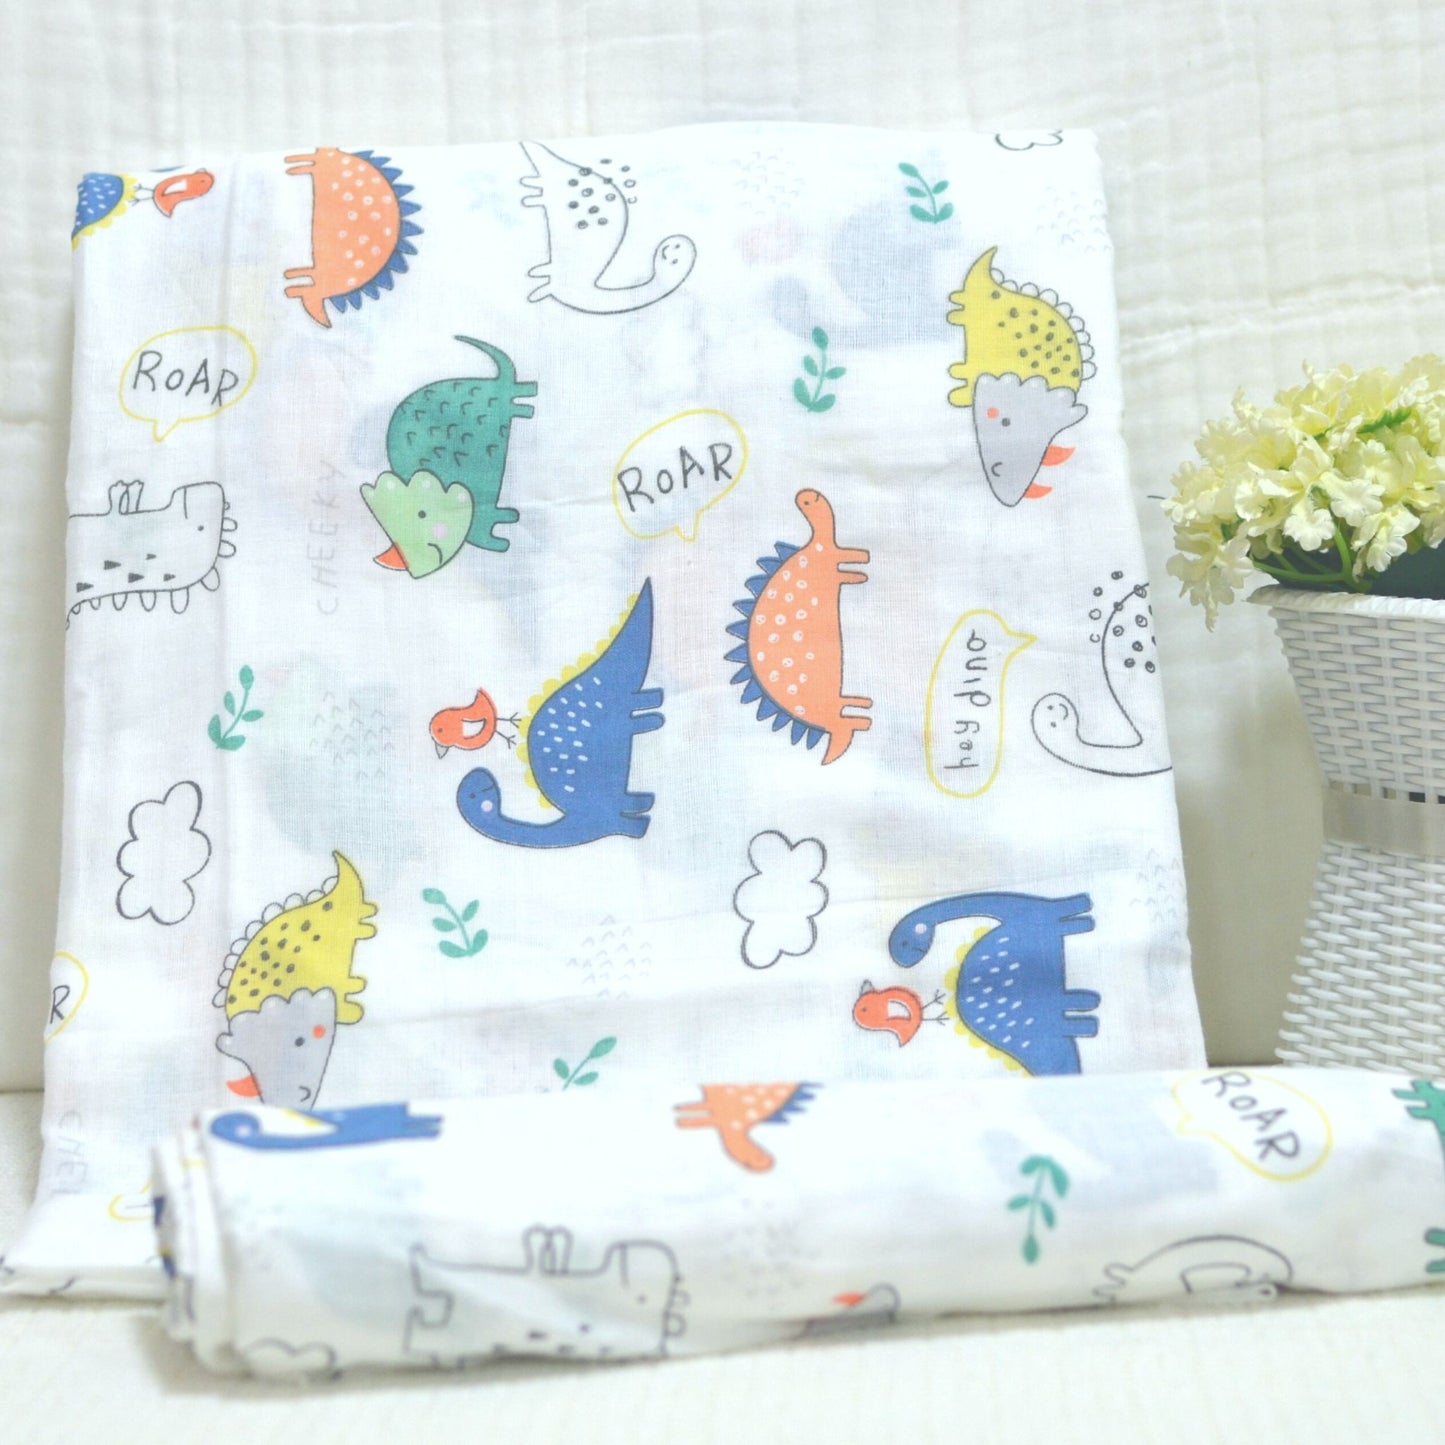 Muslin Swaddle Blankets - Plain 120 x 120 cm Collection II